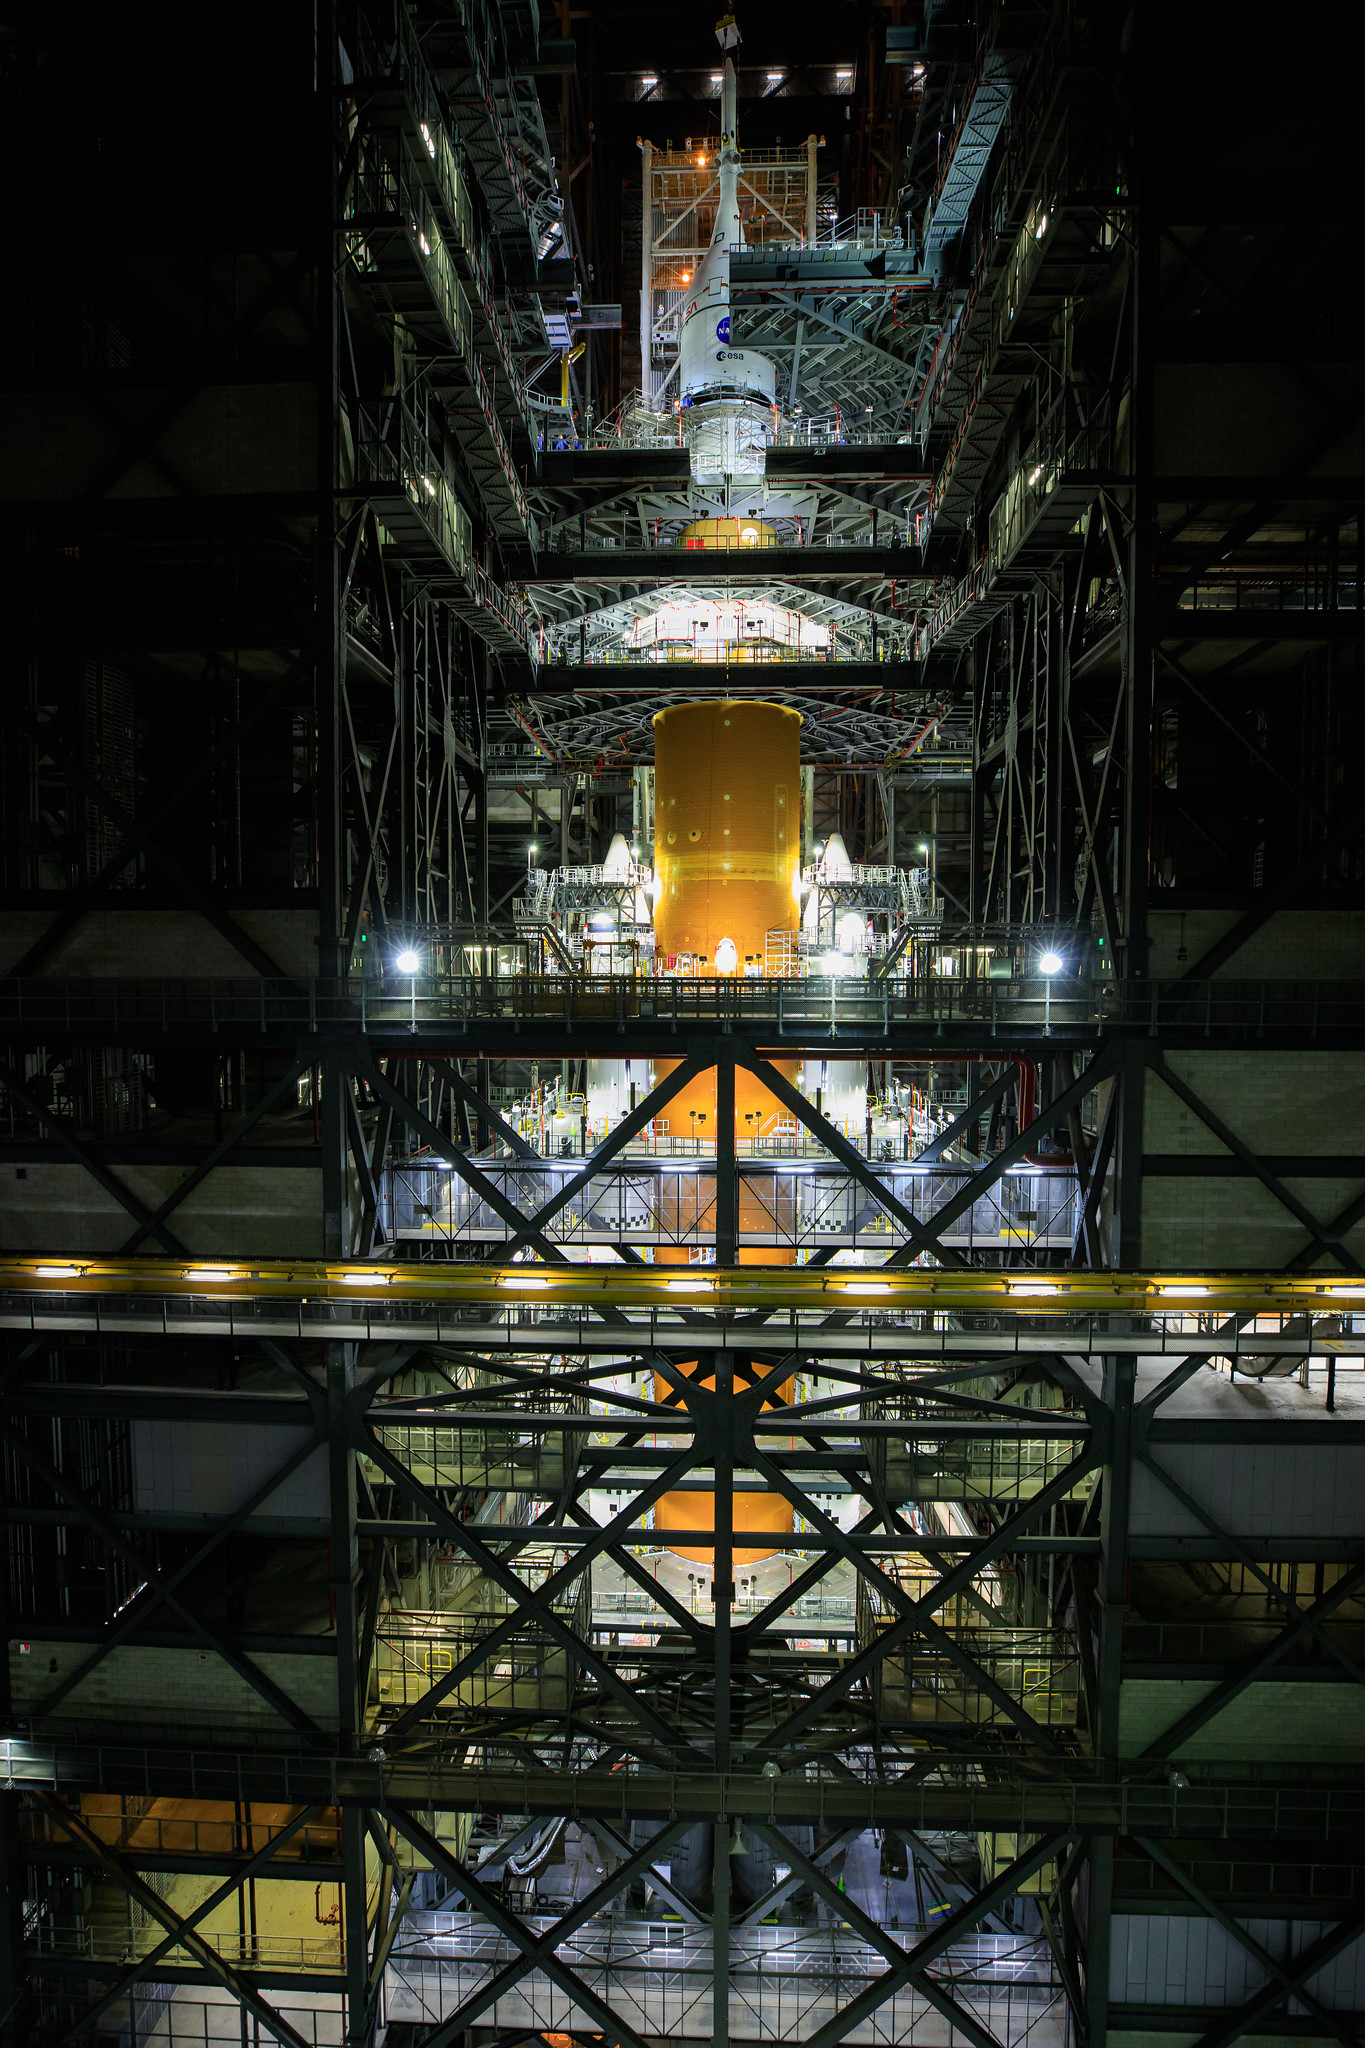 The Artemis 1 configuration stacked at the Vehicle Assembly Building at Kennedy Space Center in Florida.